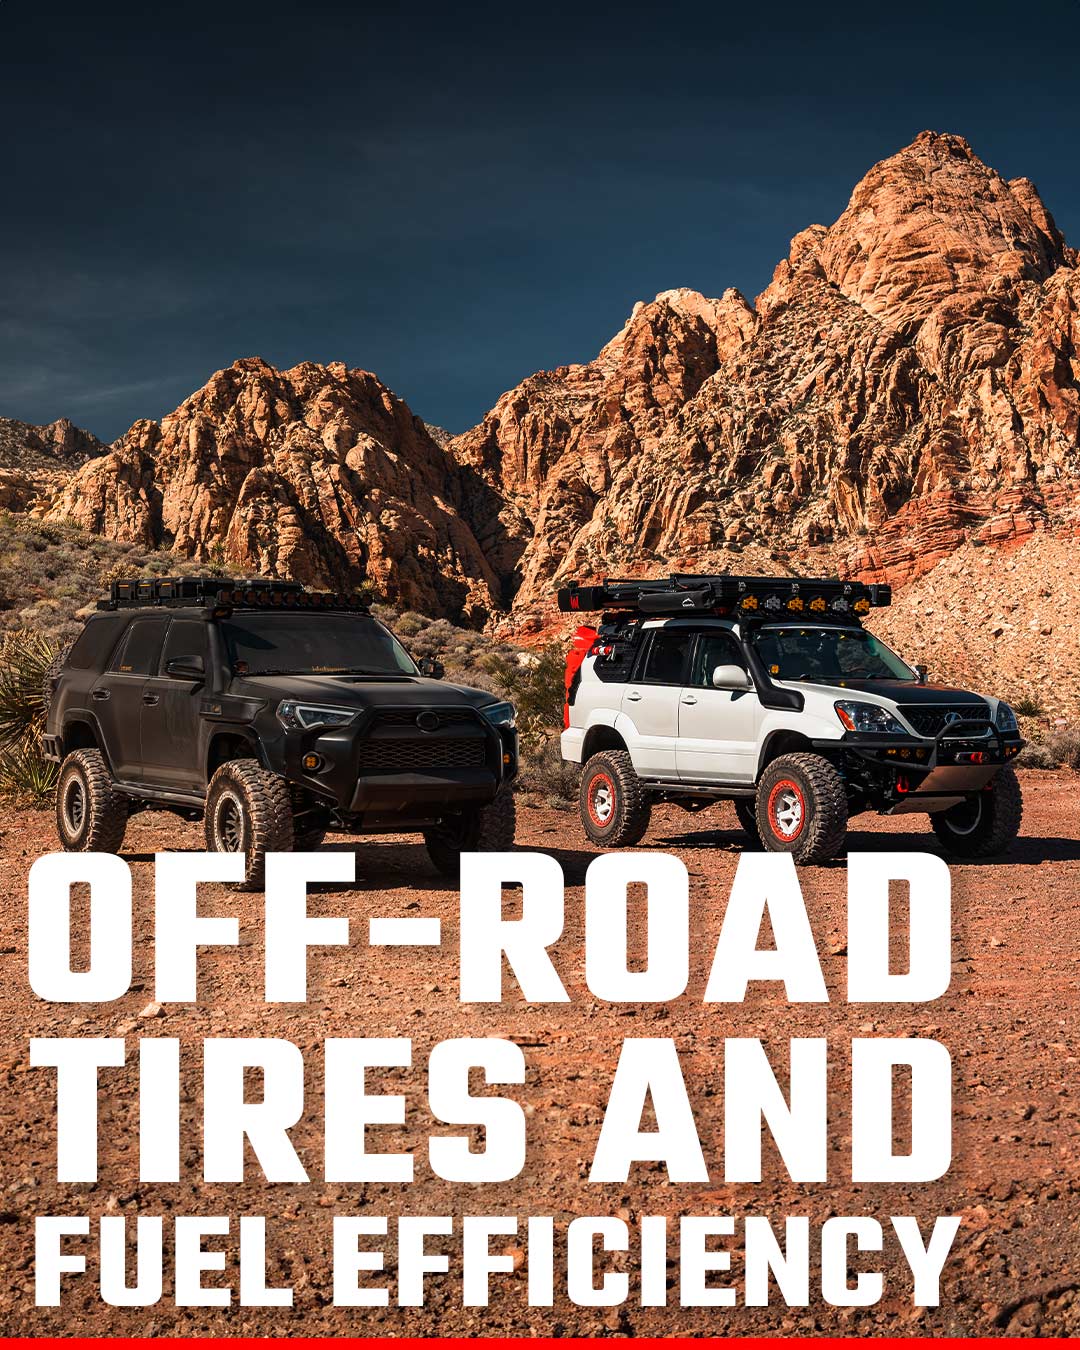 off-road tire fuel efficiency featured image